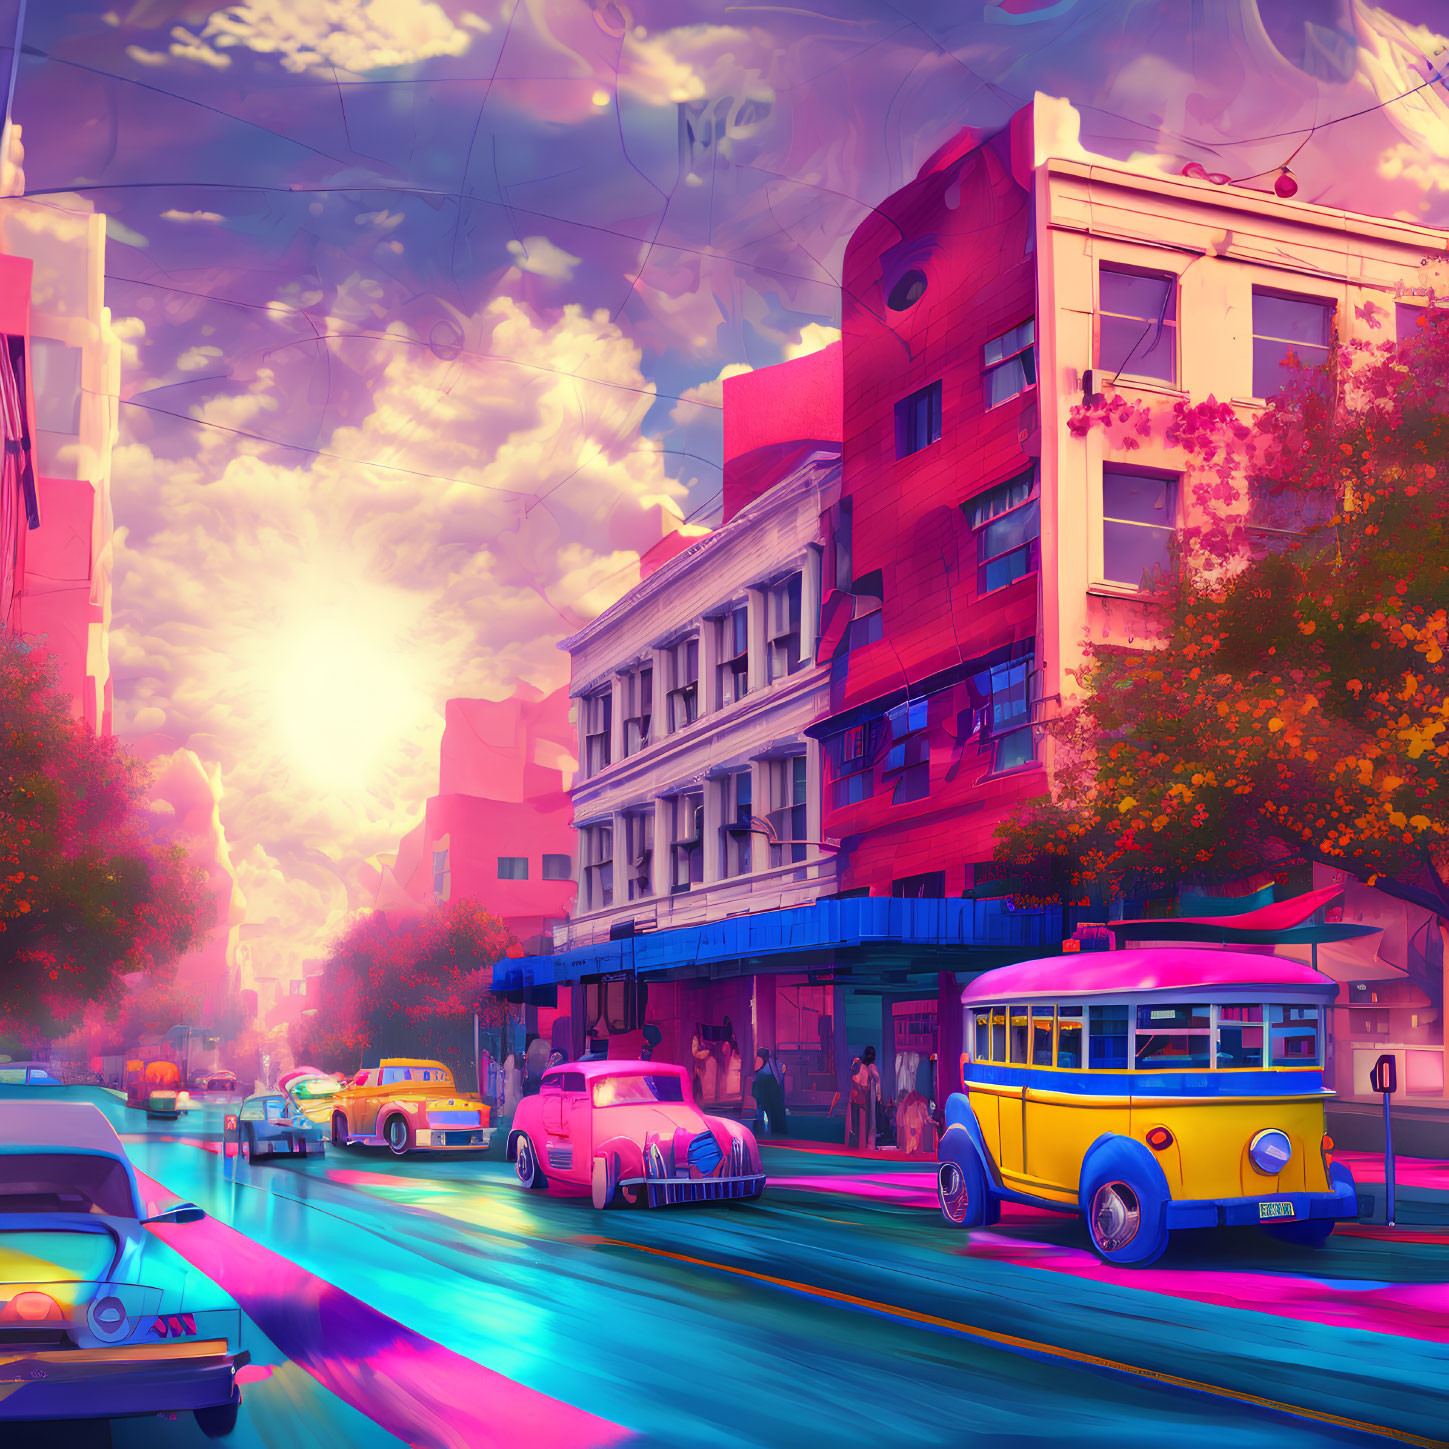 Retro-style Cars and Buses in Vibrant Street Scene